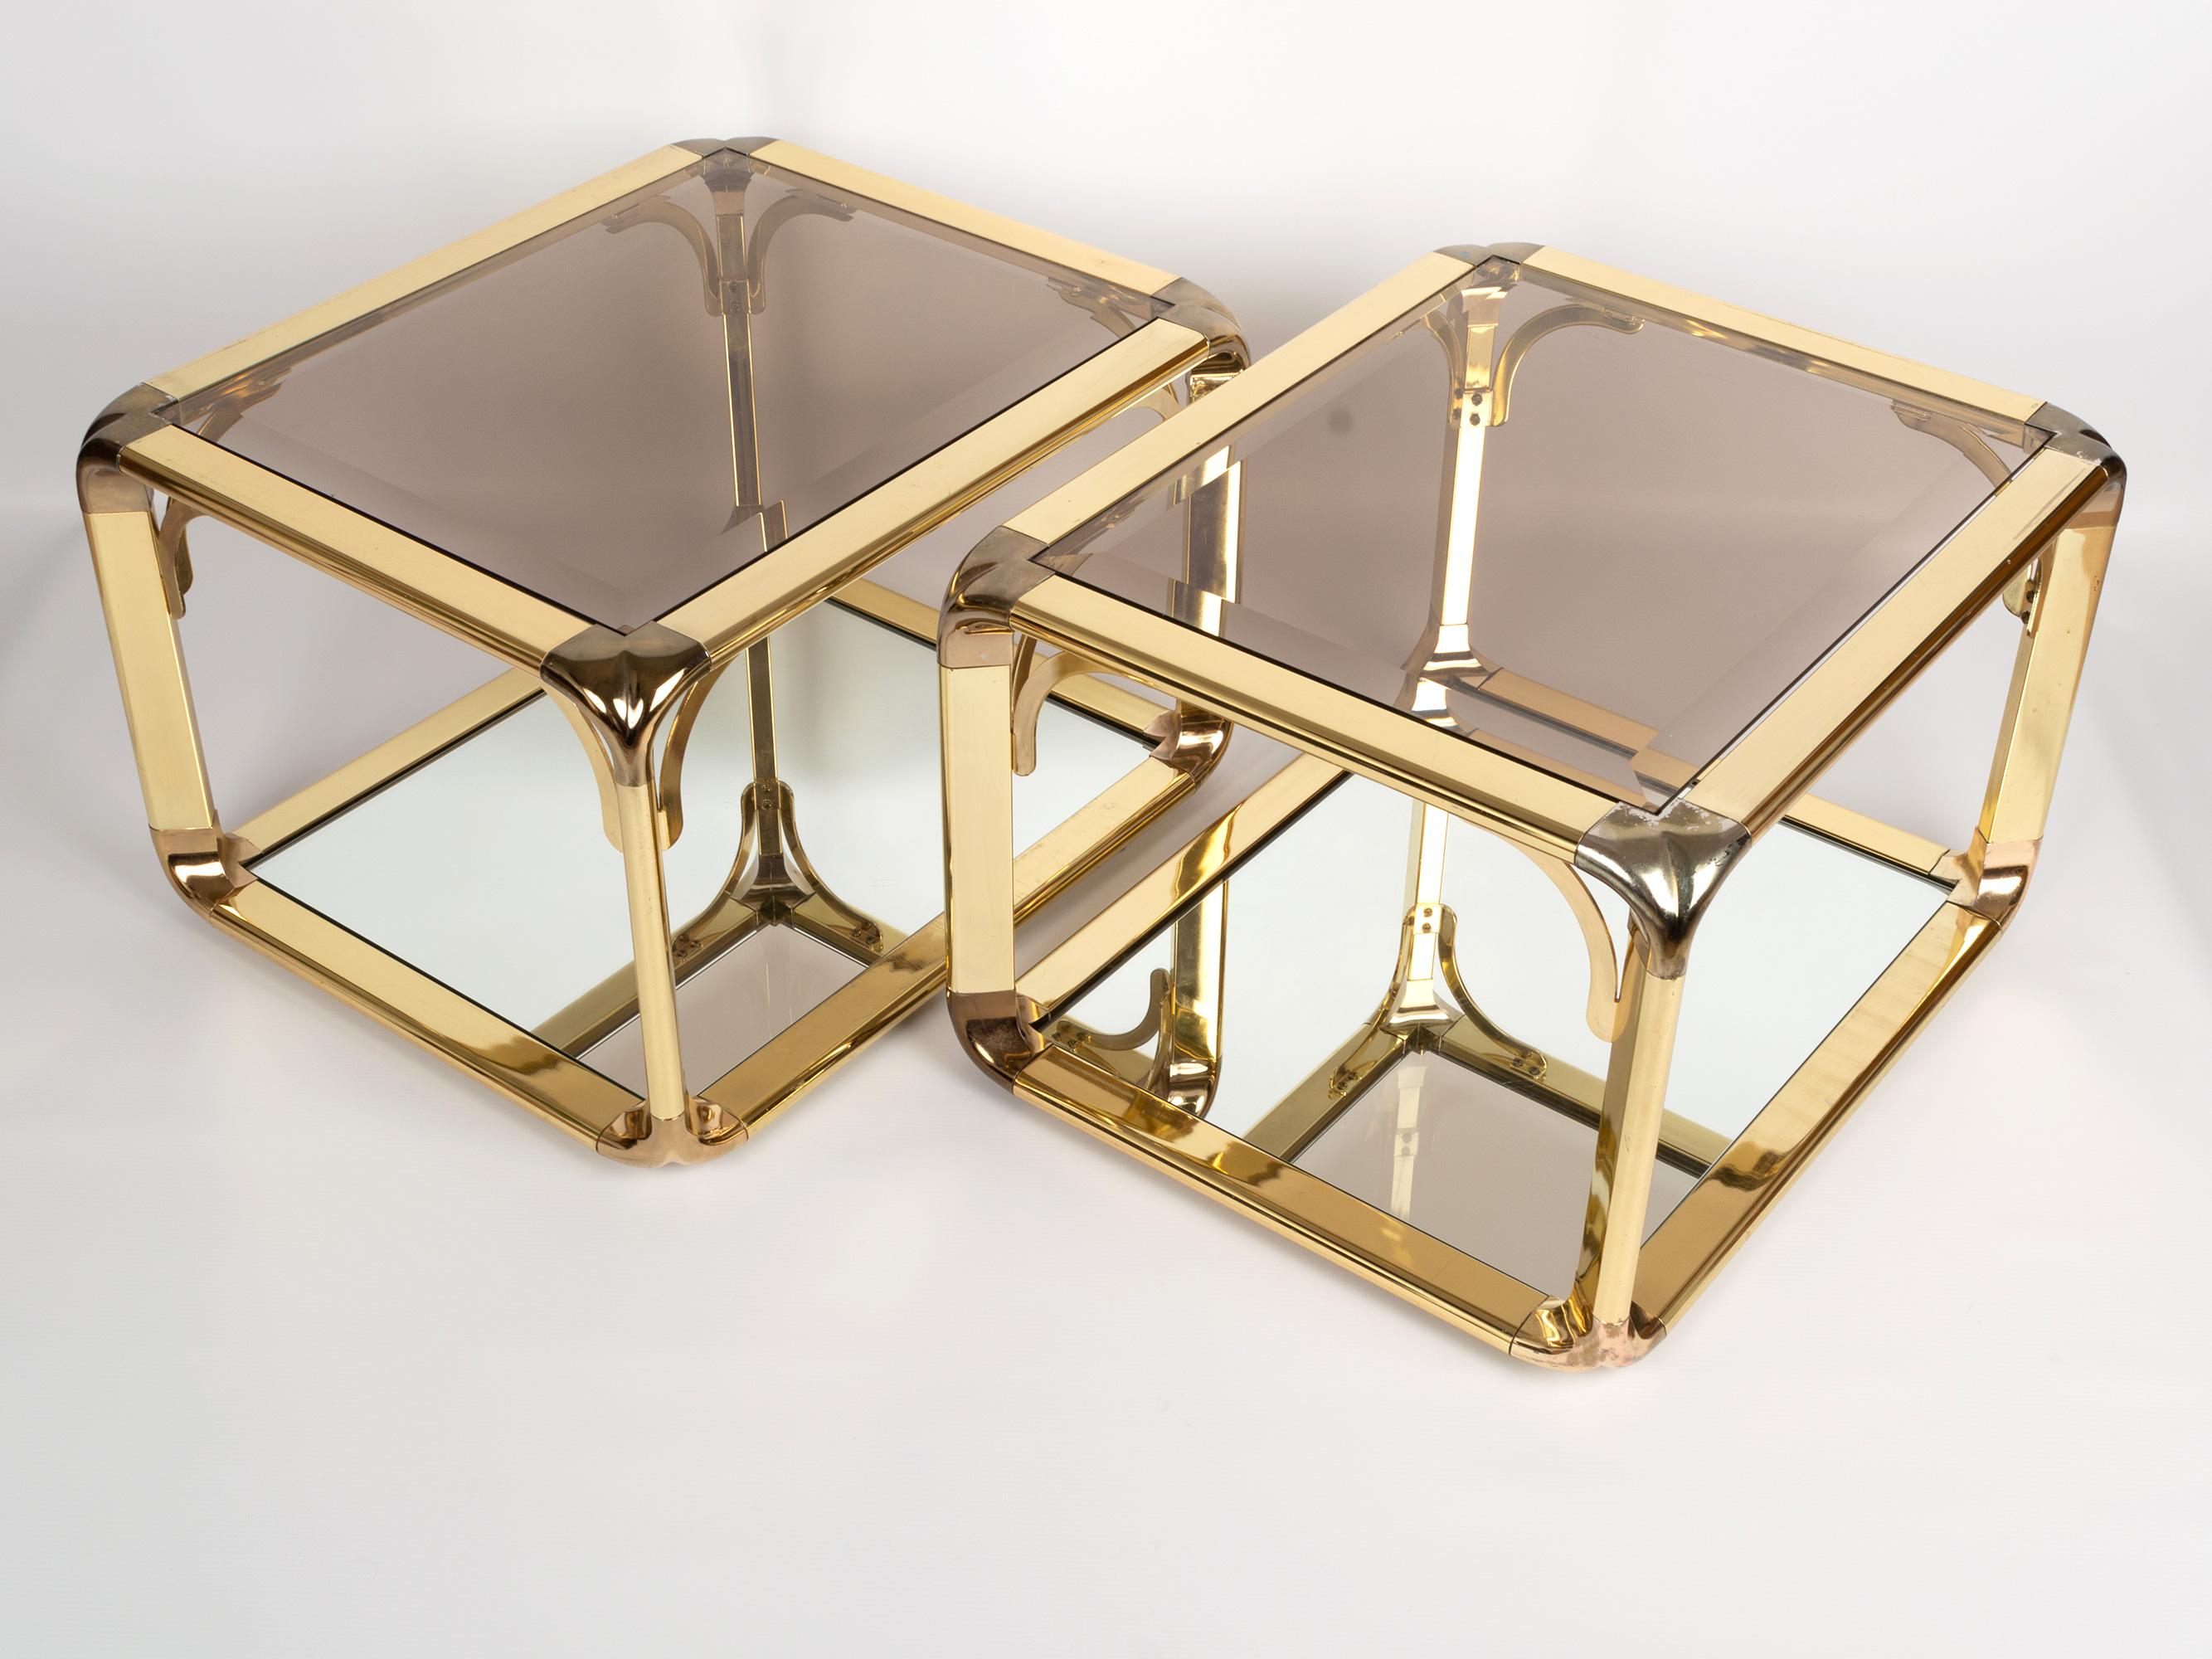 Pair of Mirrored Gold Chrome End Tables / Side Tables, Belgium, circa 1970 For Sale 2